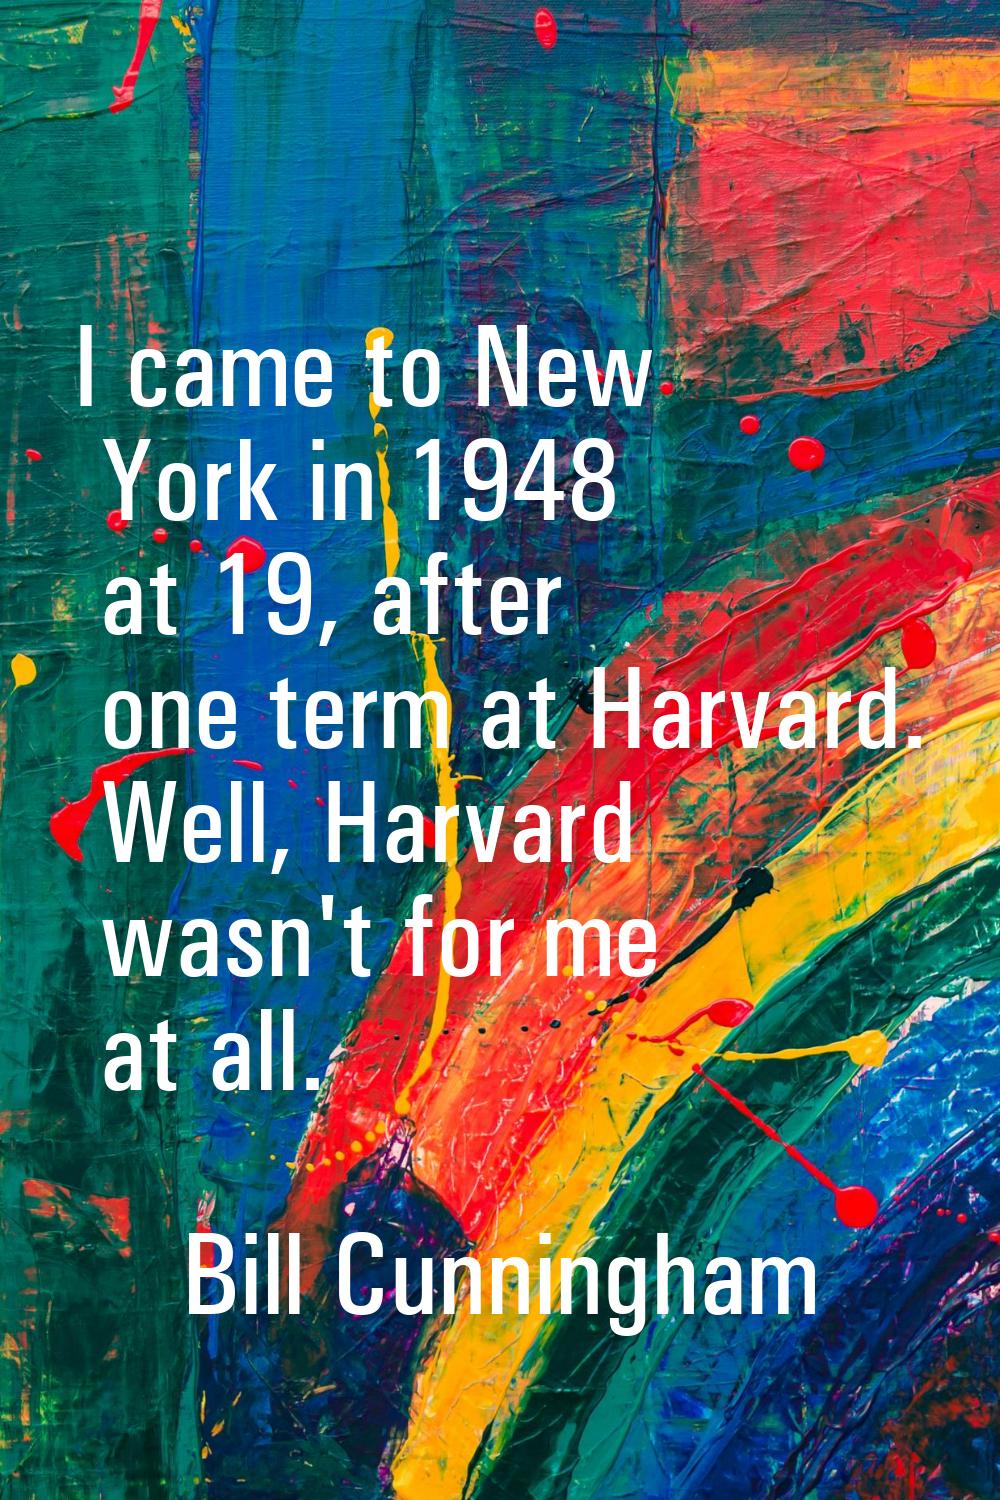 I came to New York in 1948 at 19, after one term at Harvard. Well, Harvard wasn't for me at all.